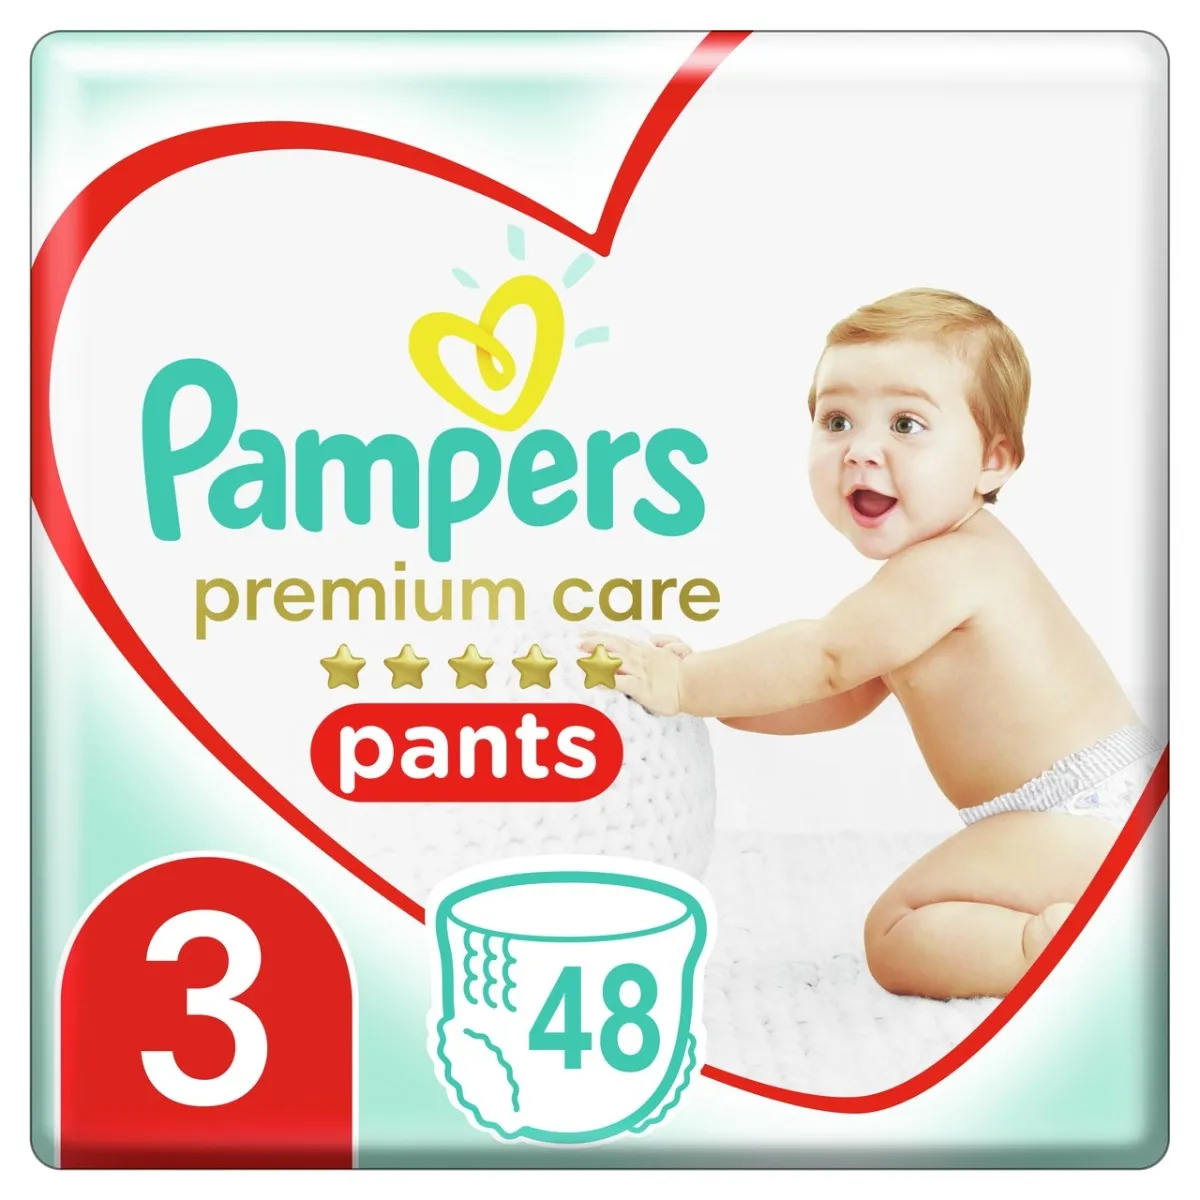 pampers polityka